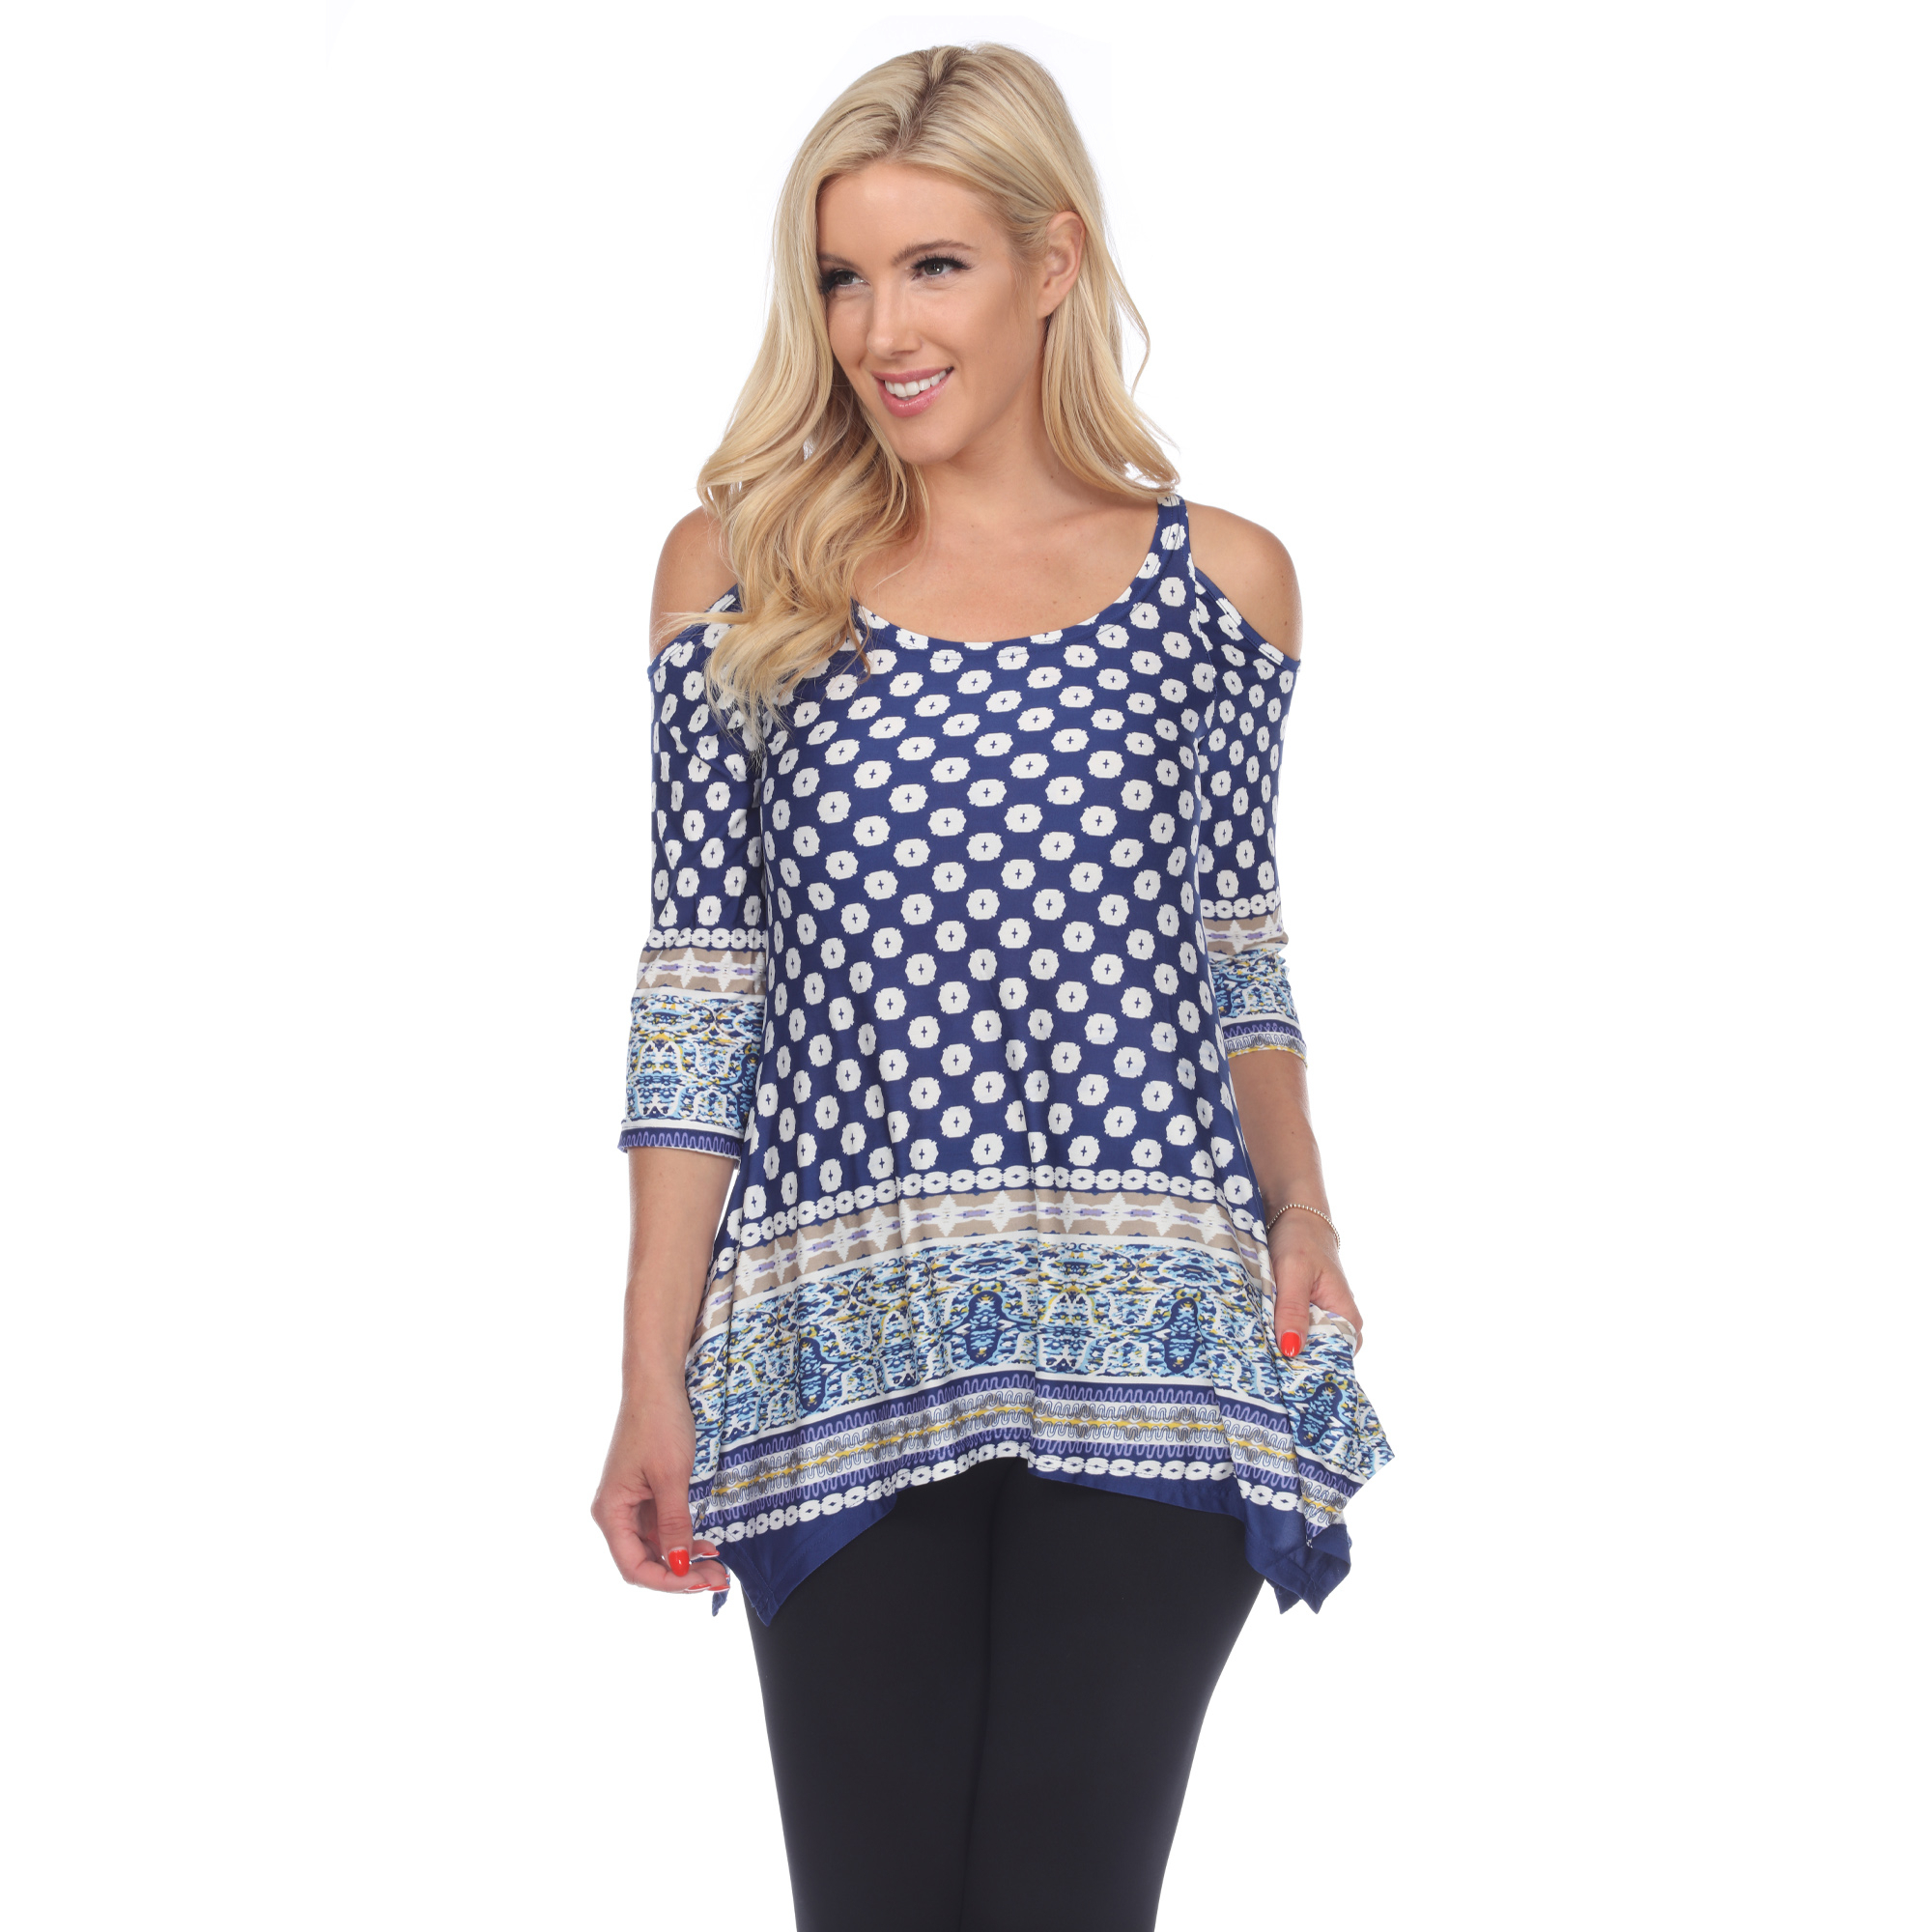 White Mark Women's Cold Shoulder Quarter Sleeve Printed Tunic Top With Pockets - Navy/White Polka Dots, 3X